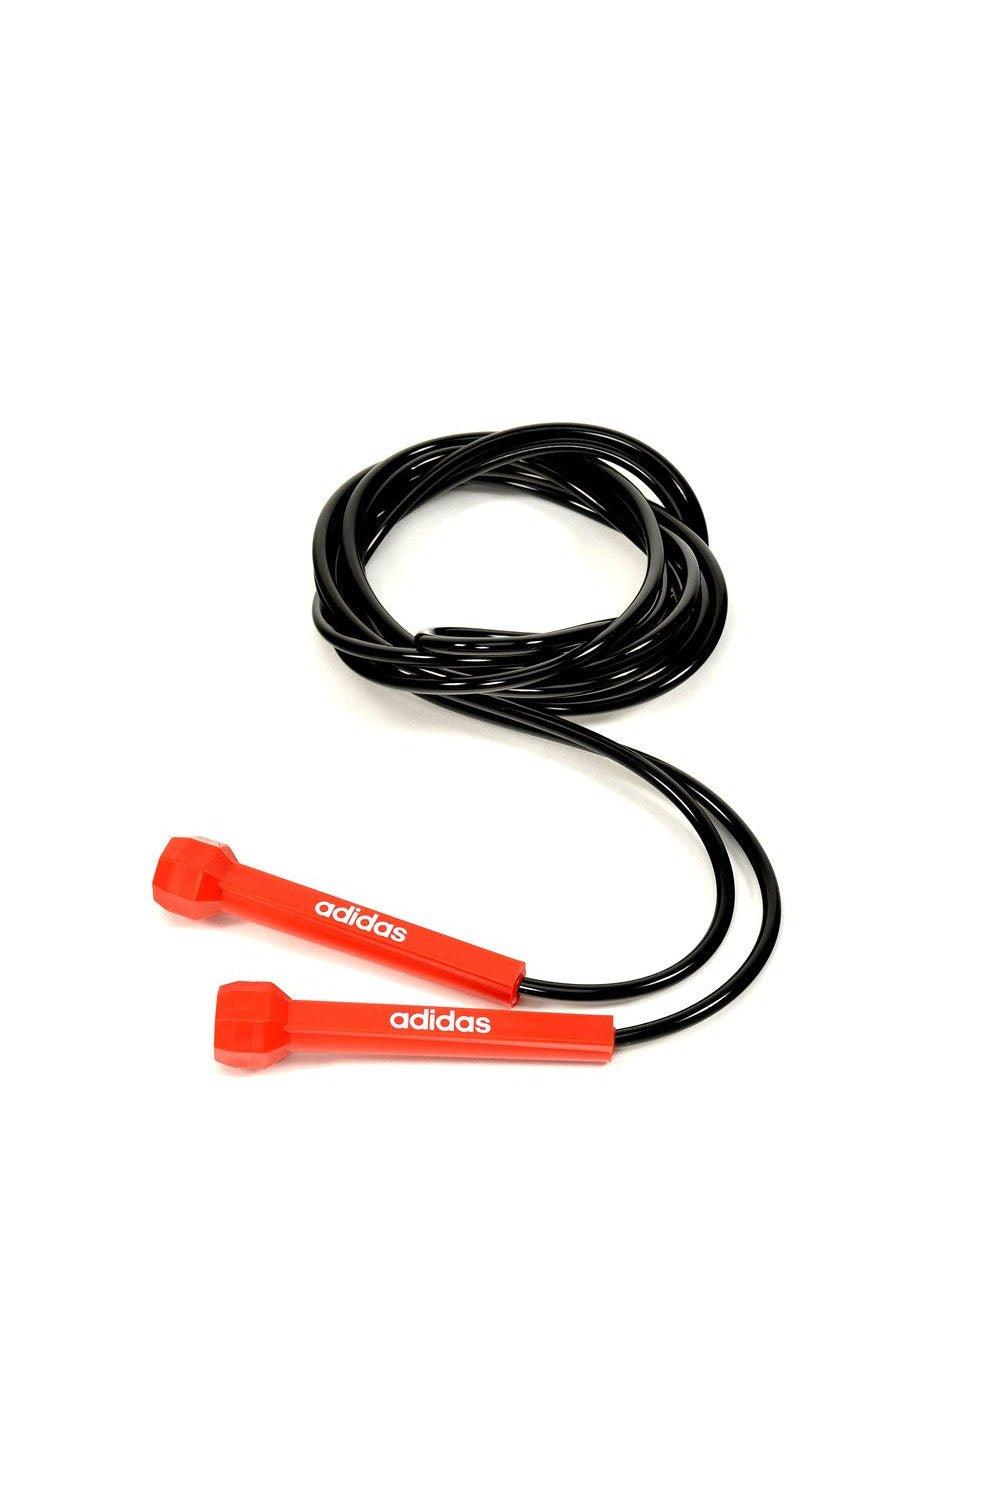 Adidas Essential Skipping Rope|red